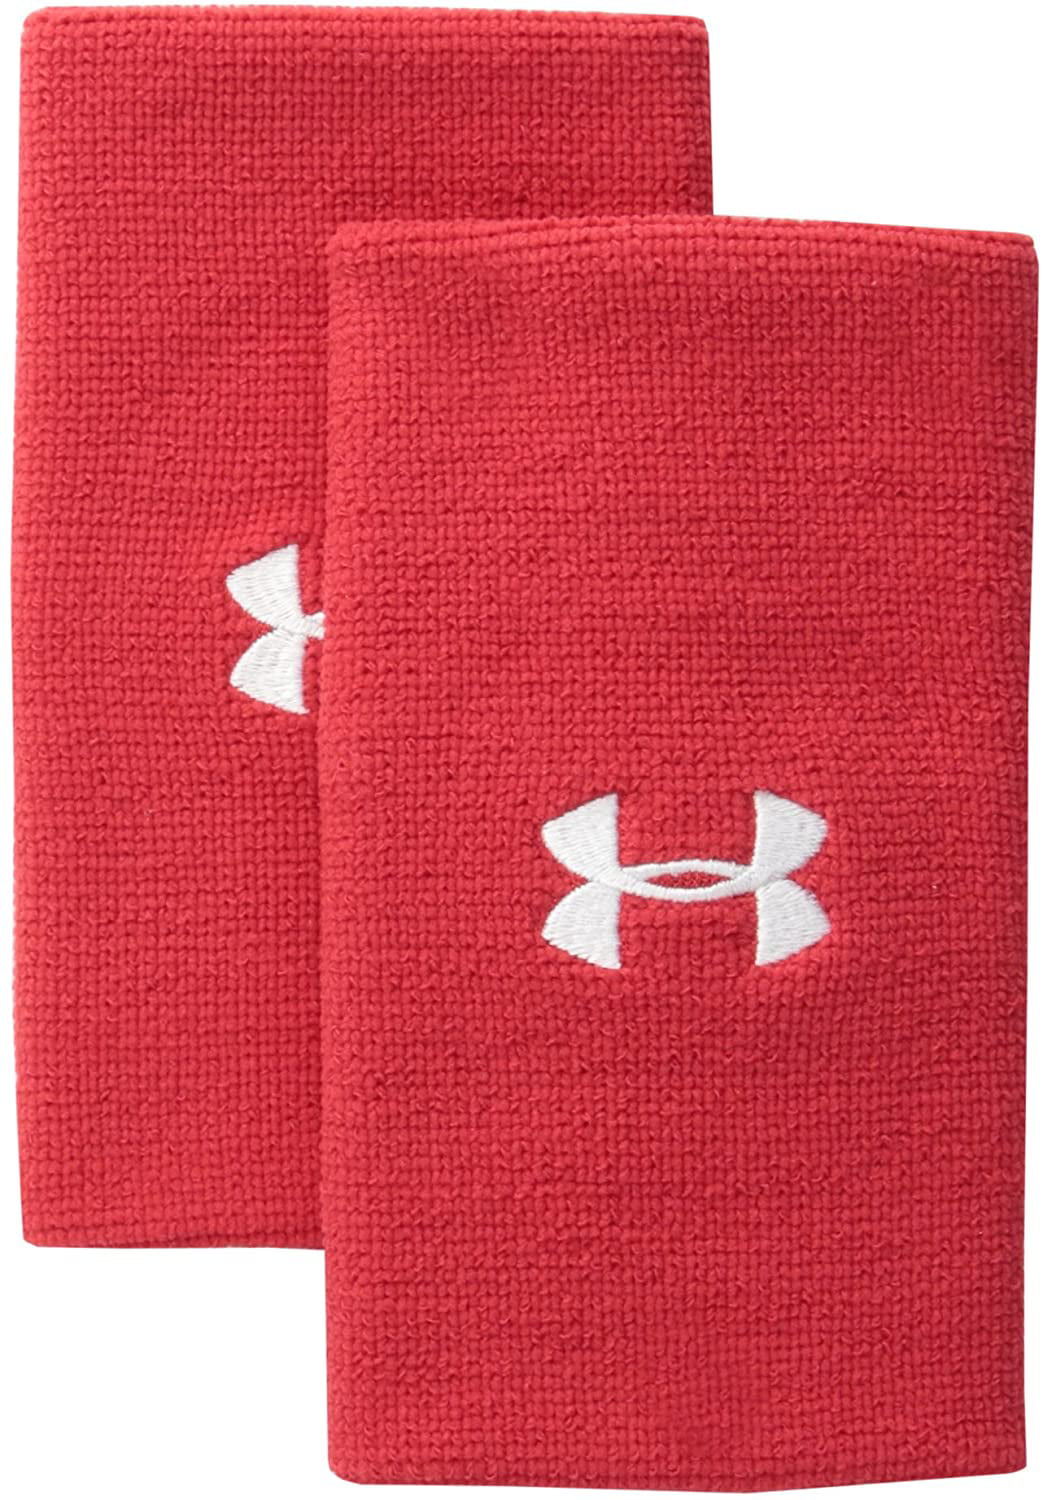 Under Armour 6 Performance Wristband 2-Pack 